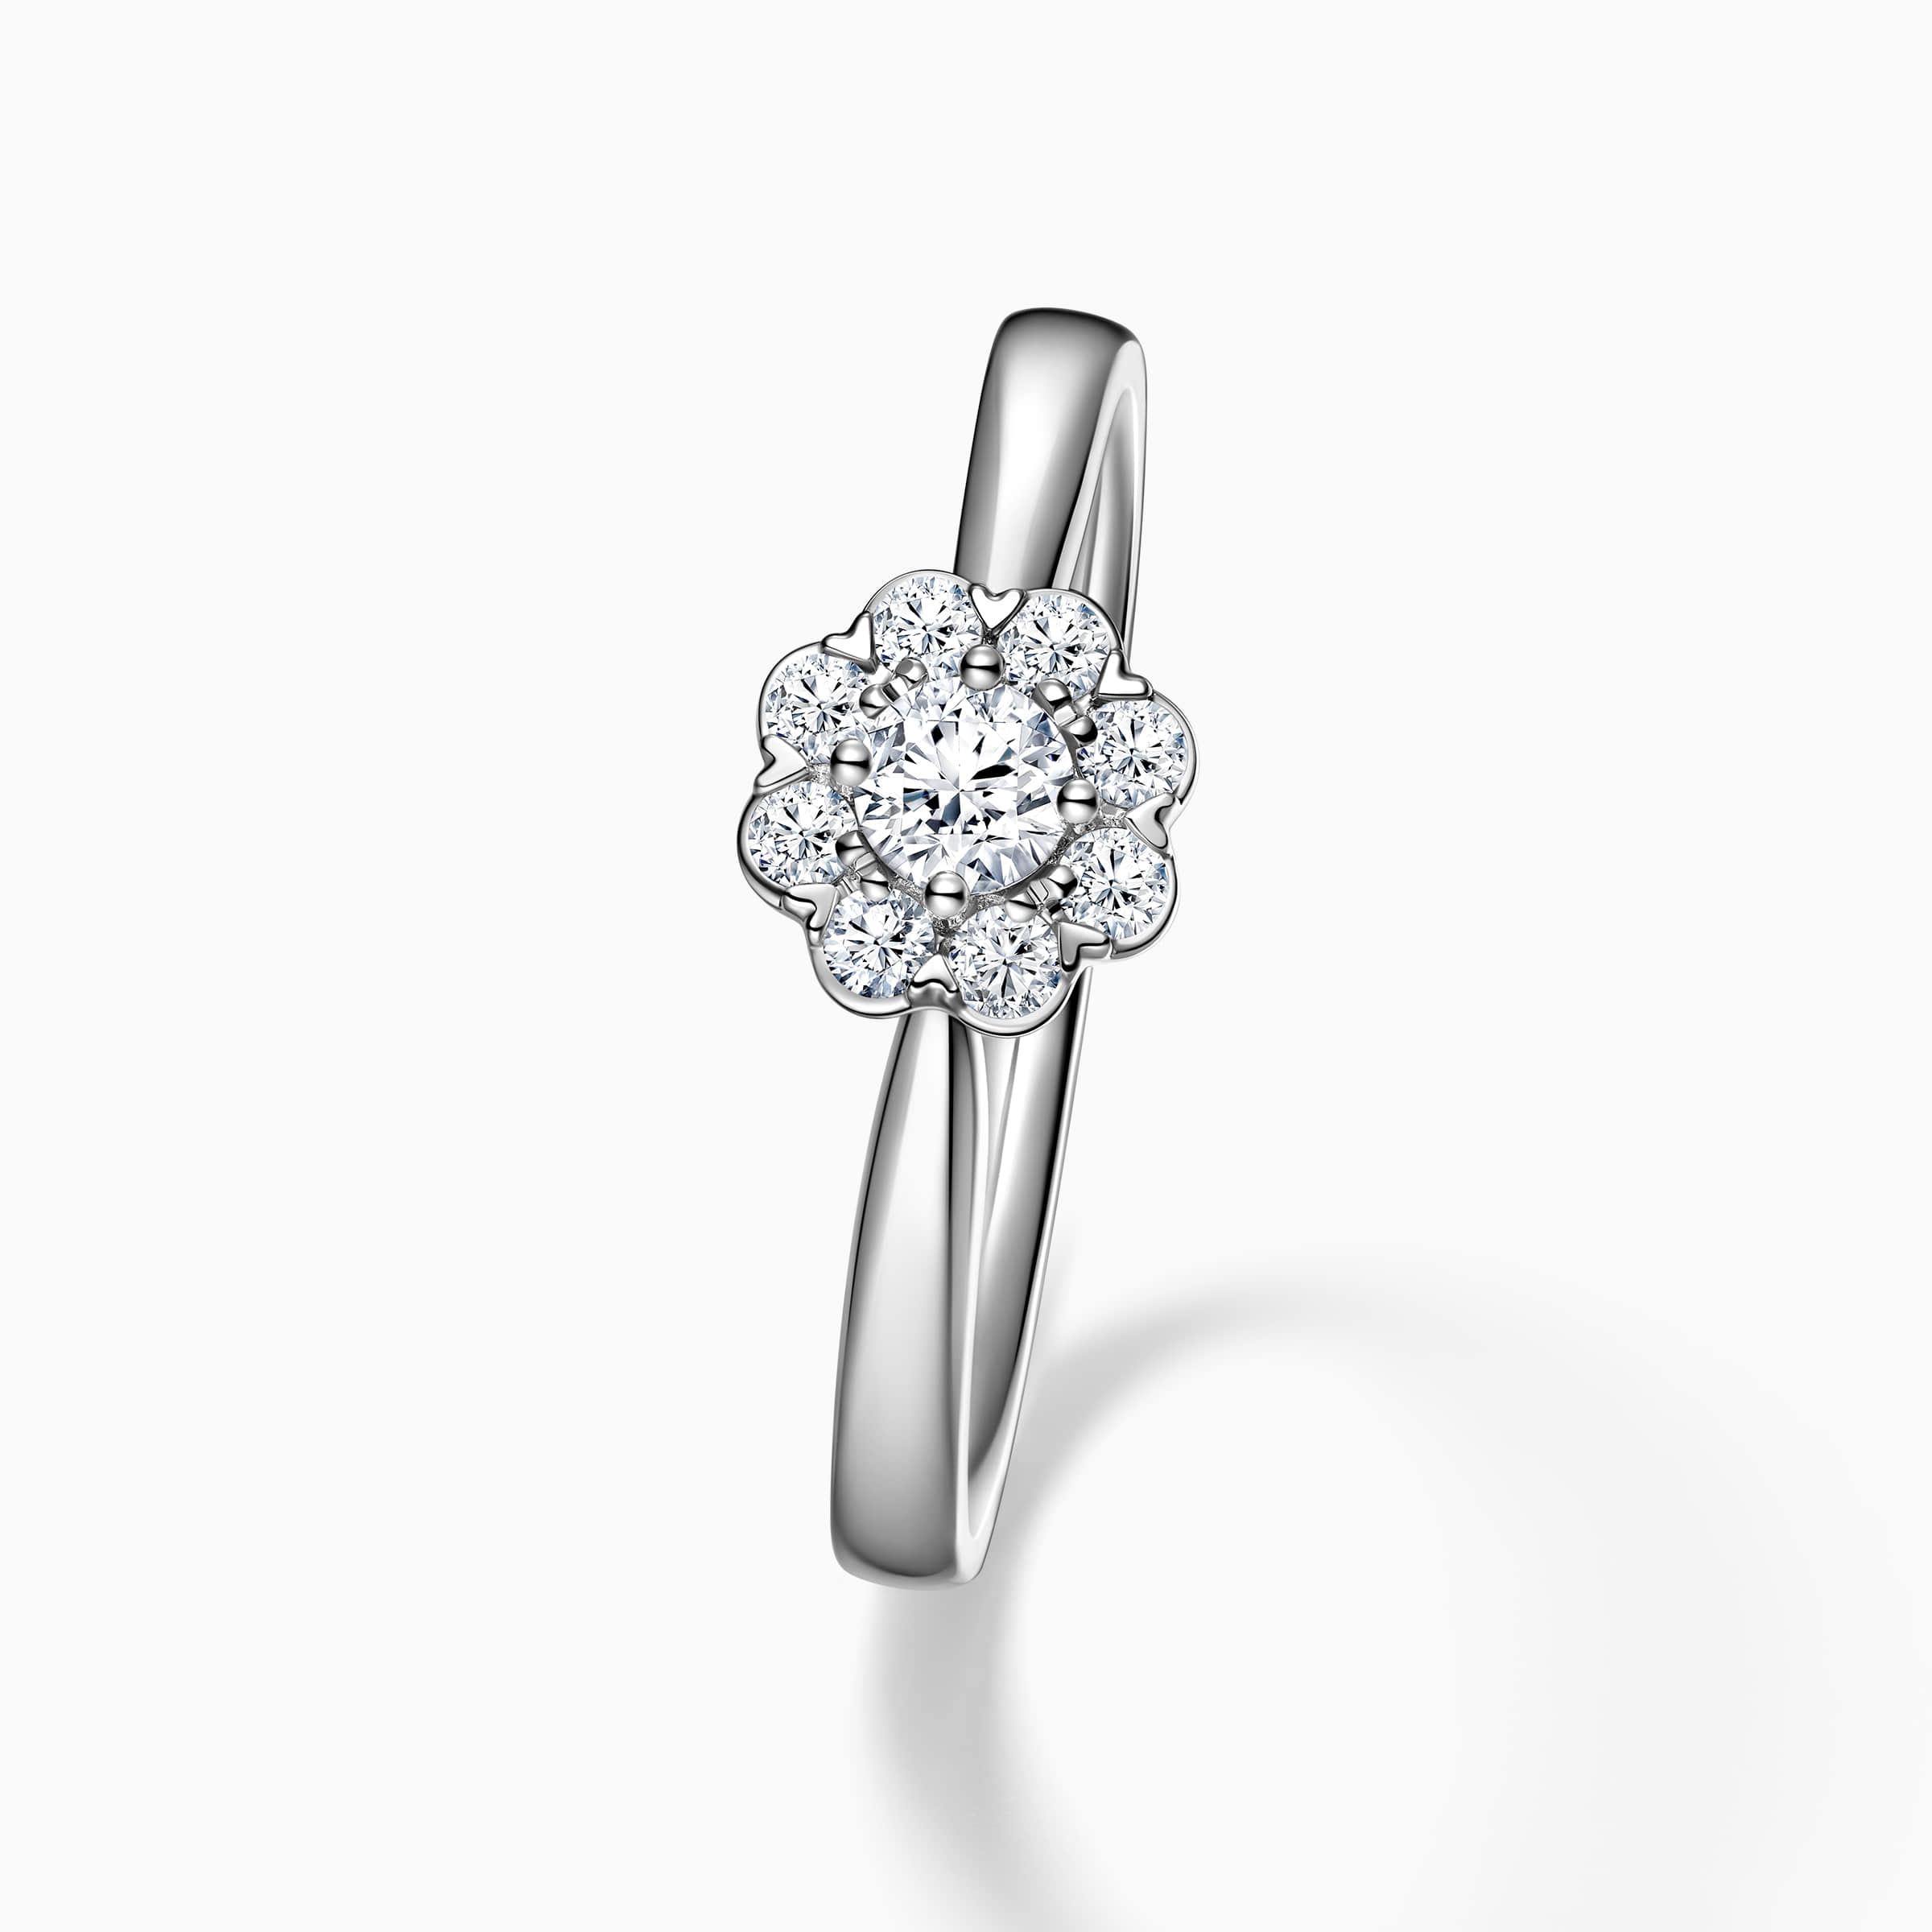 Darry Ring floral halo engagement ring